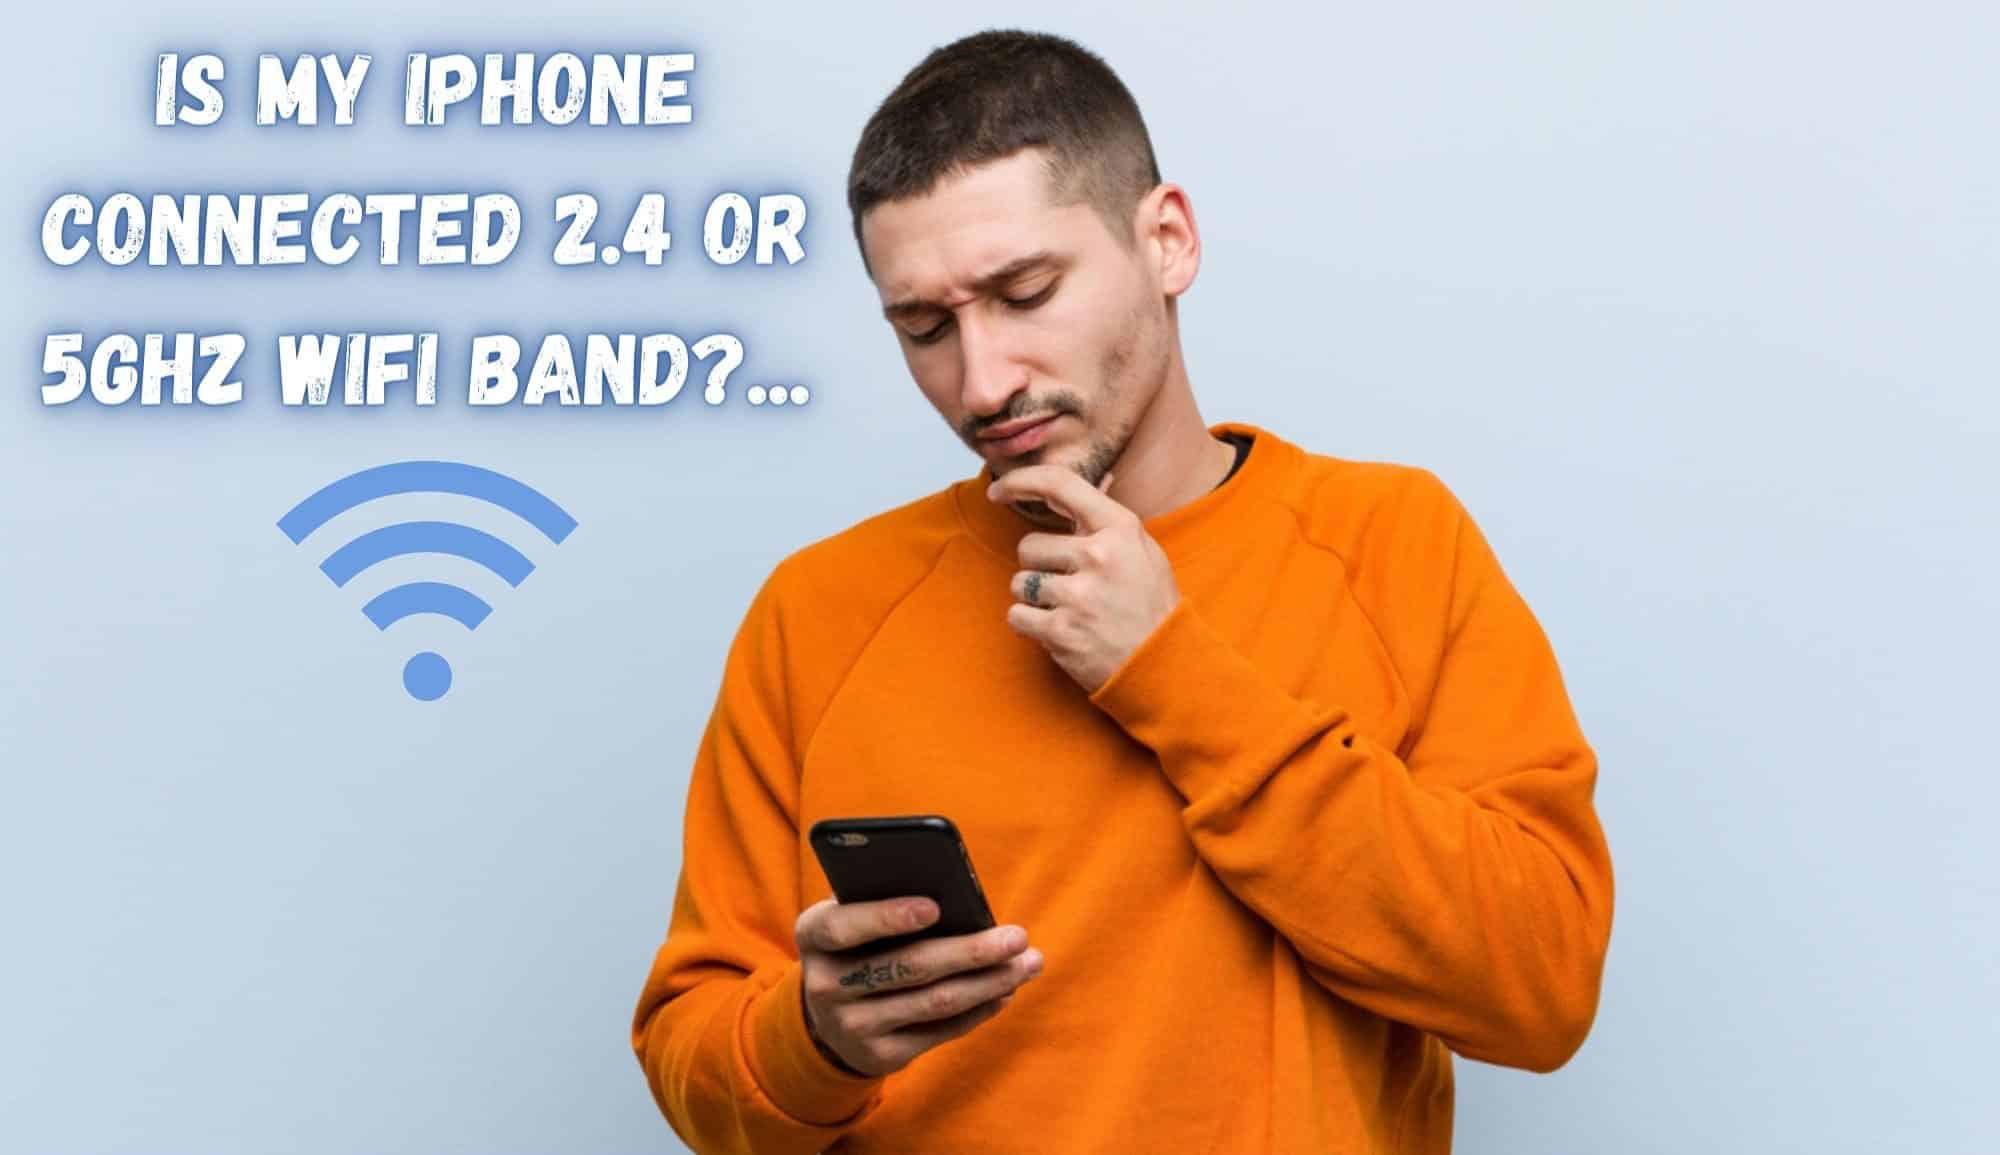 Is My iPhone Connected 2.4 Or 5GHz WiFi Band